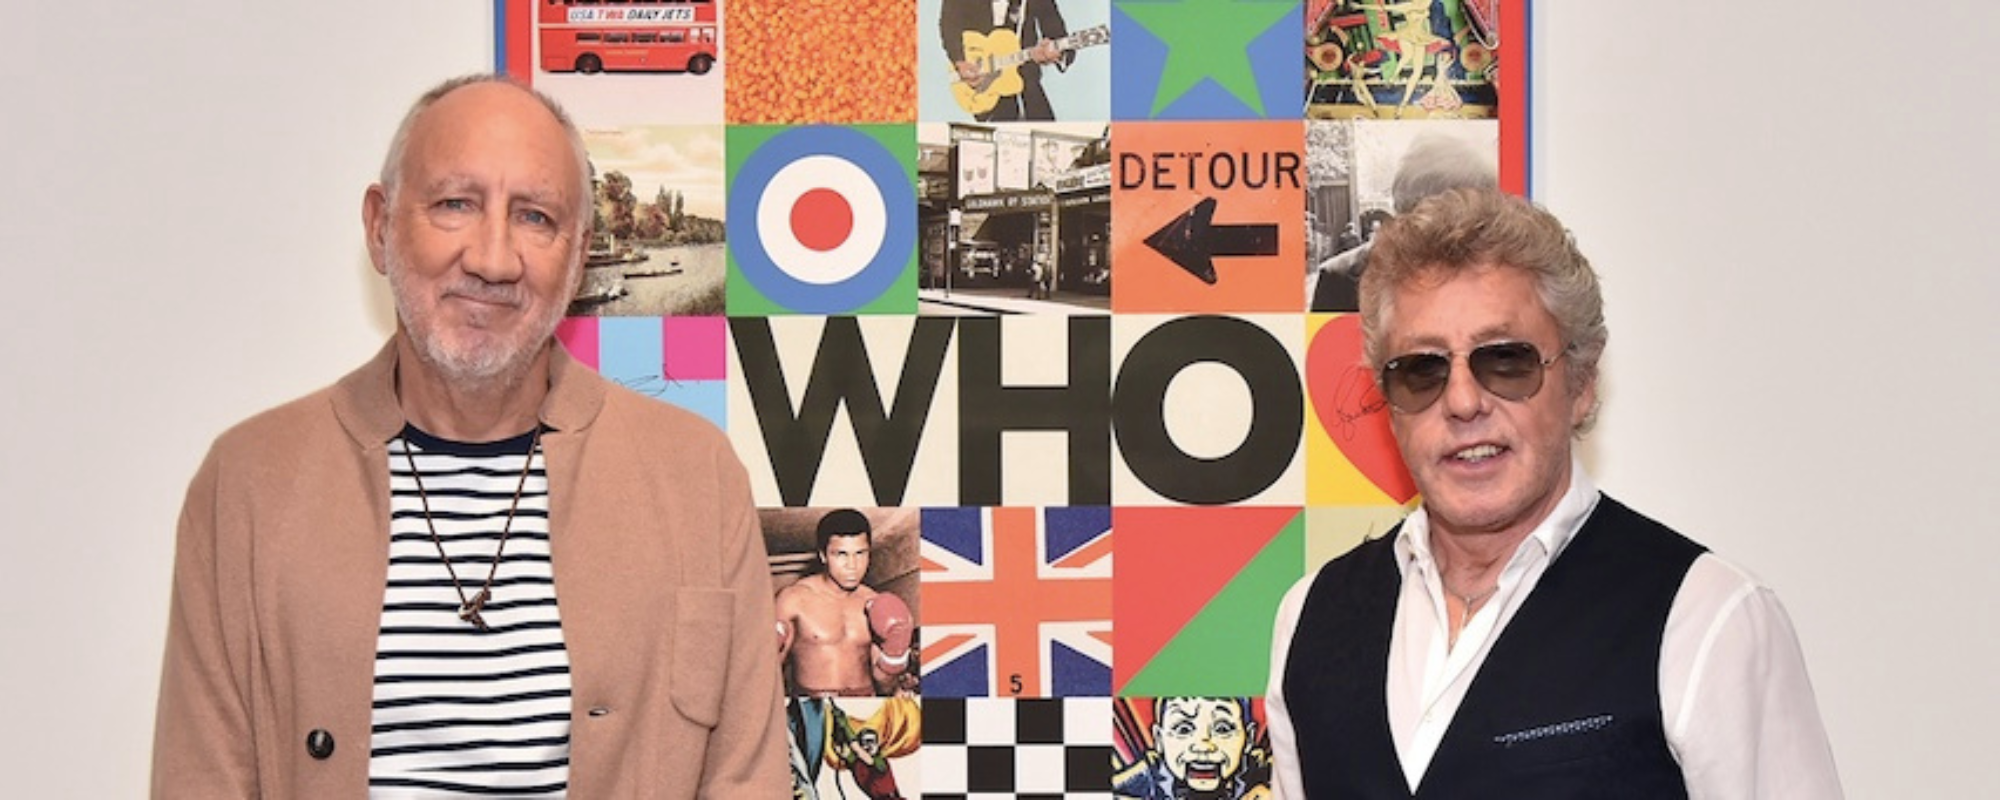 Who-Inspired Art Prints Signed by Roger Daltrey on Sale to Benefit Teenage Cancer Trust